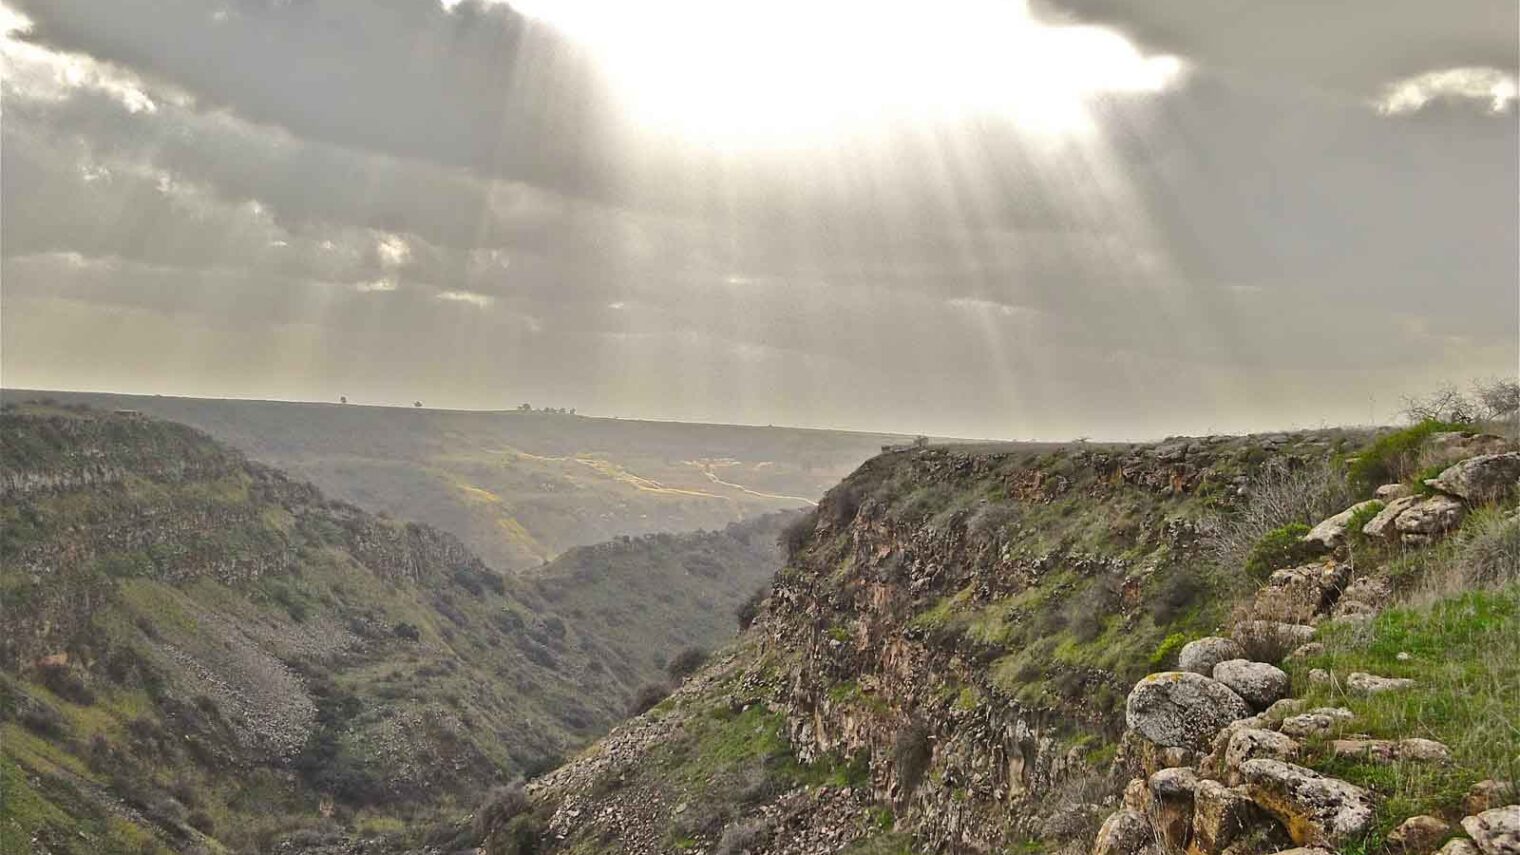 And mountains to climb. Gamla, in the Golan Heights. Photo by Daniel Santacruz